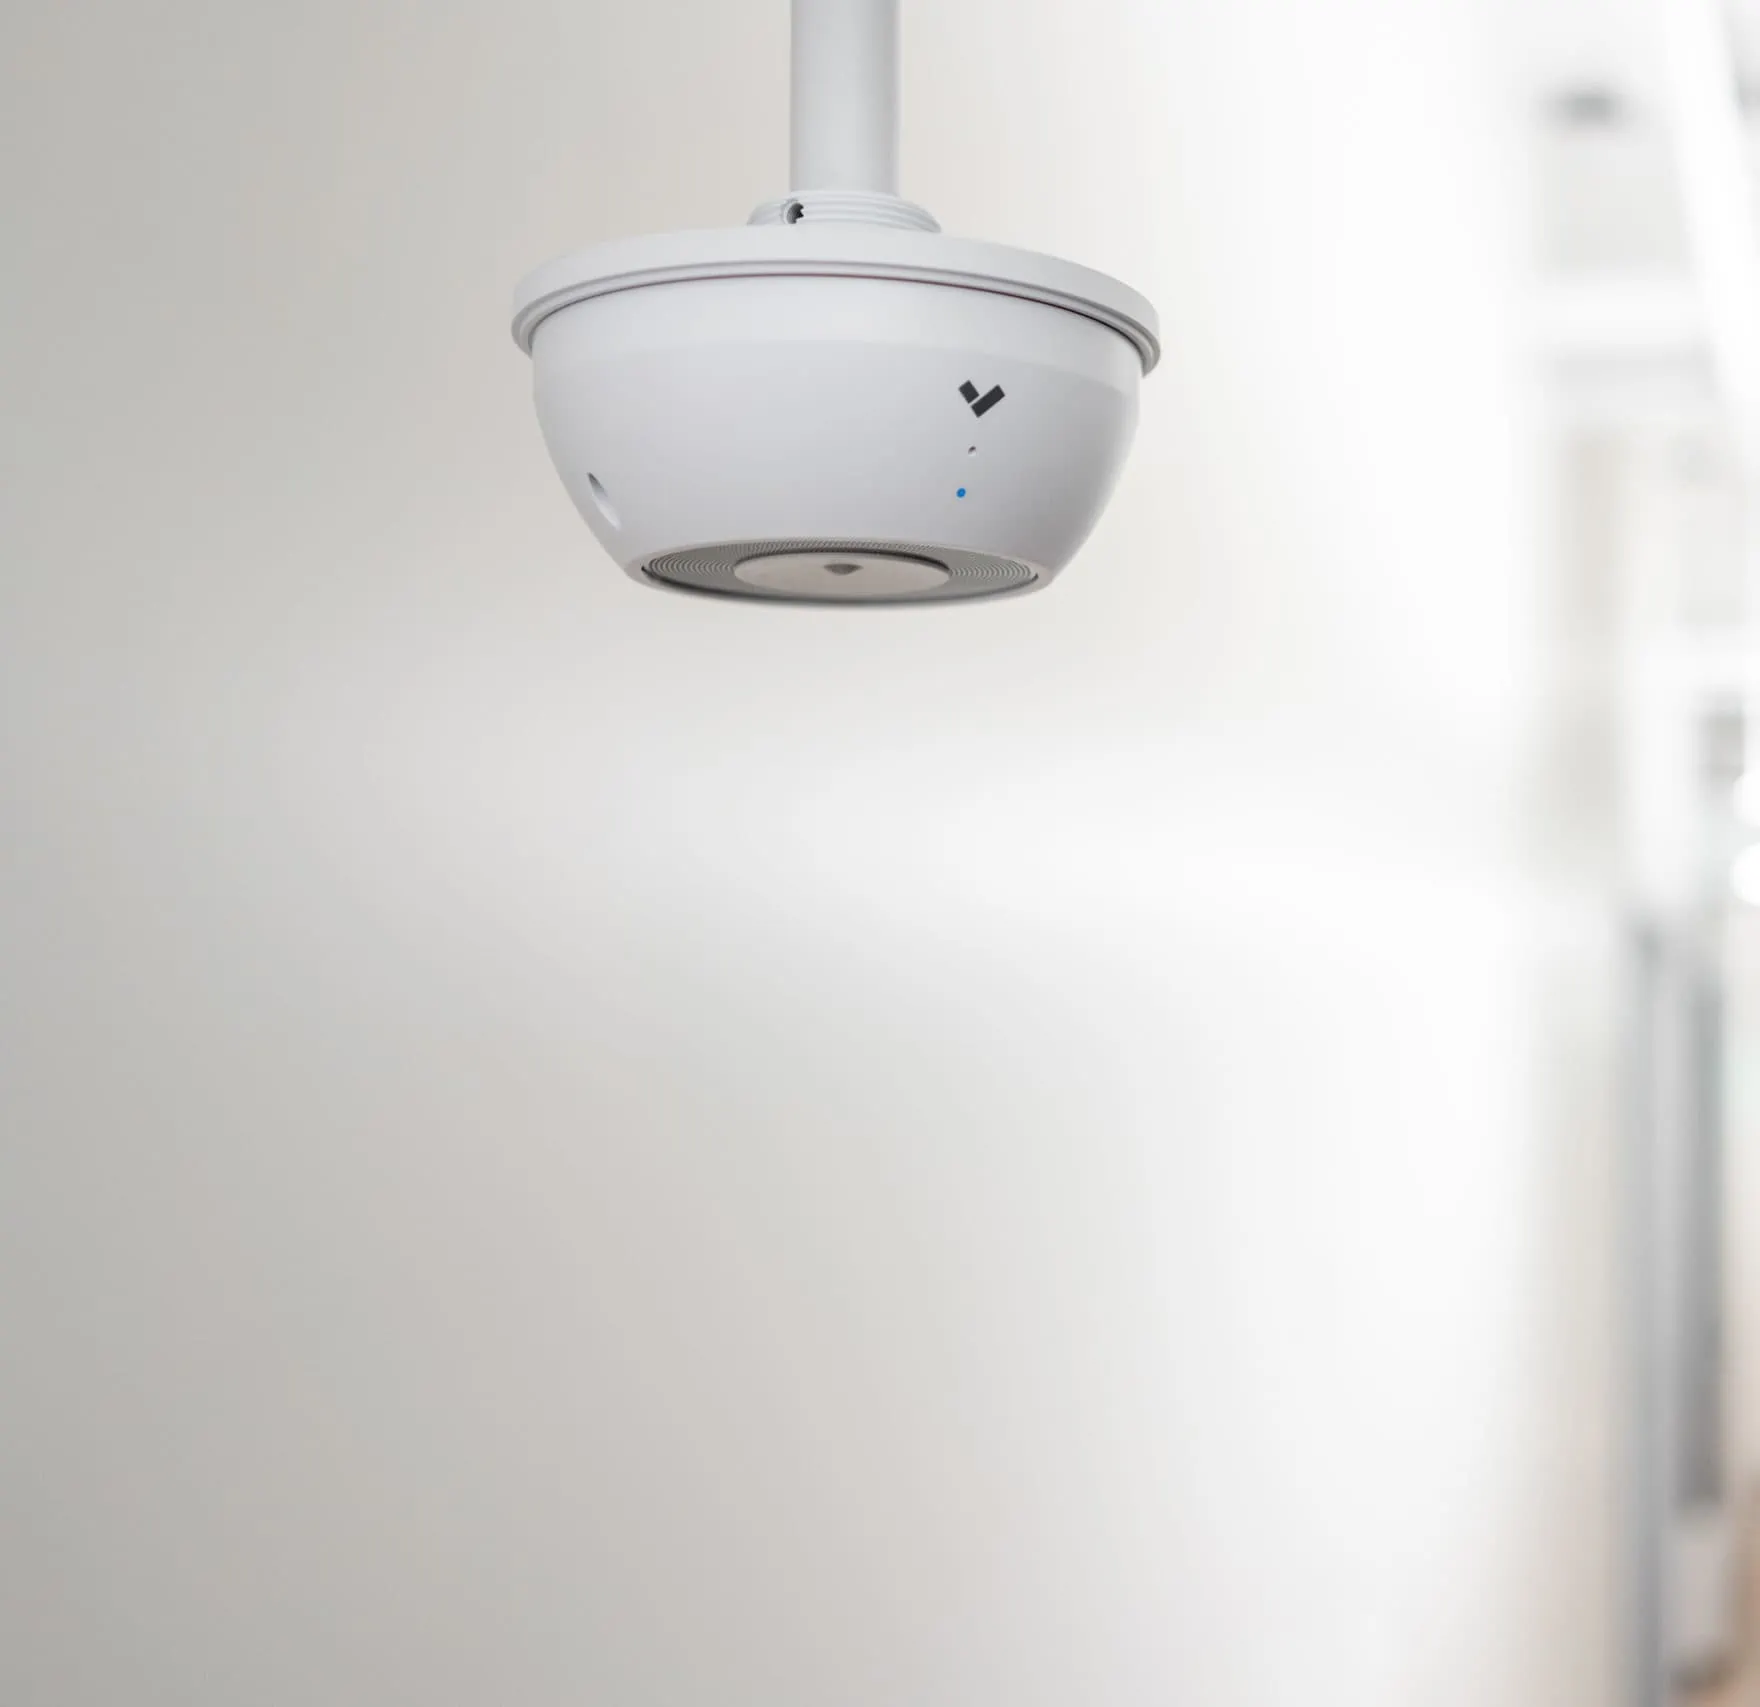 Office building with a smoke detector security camera system